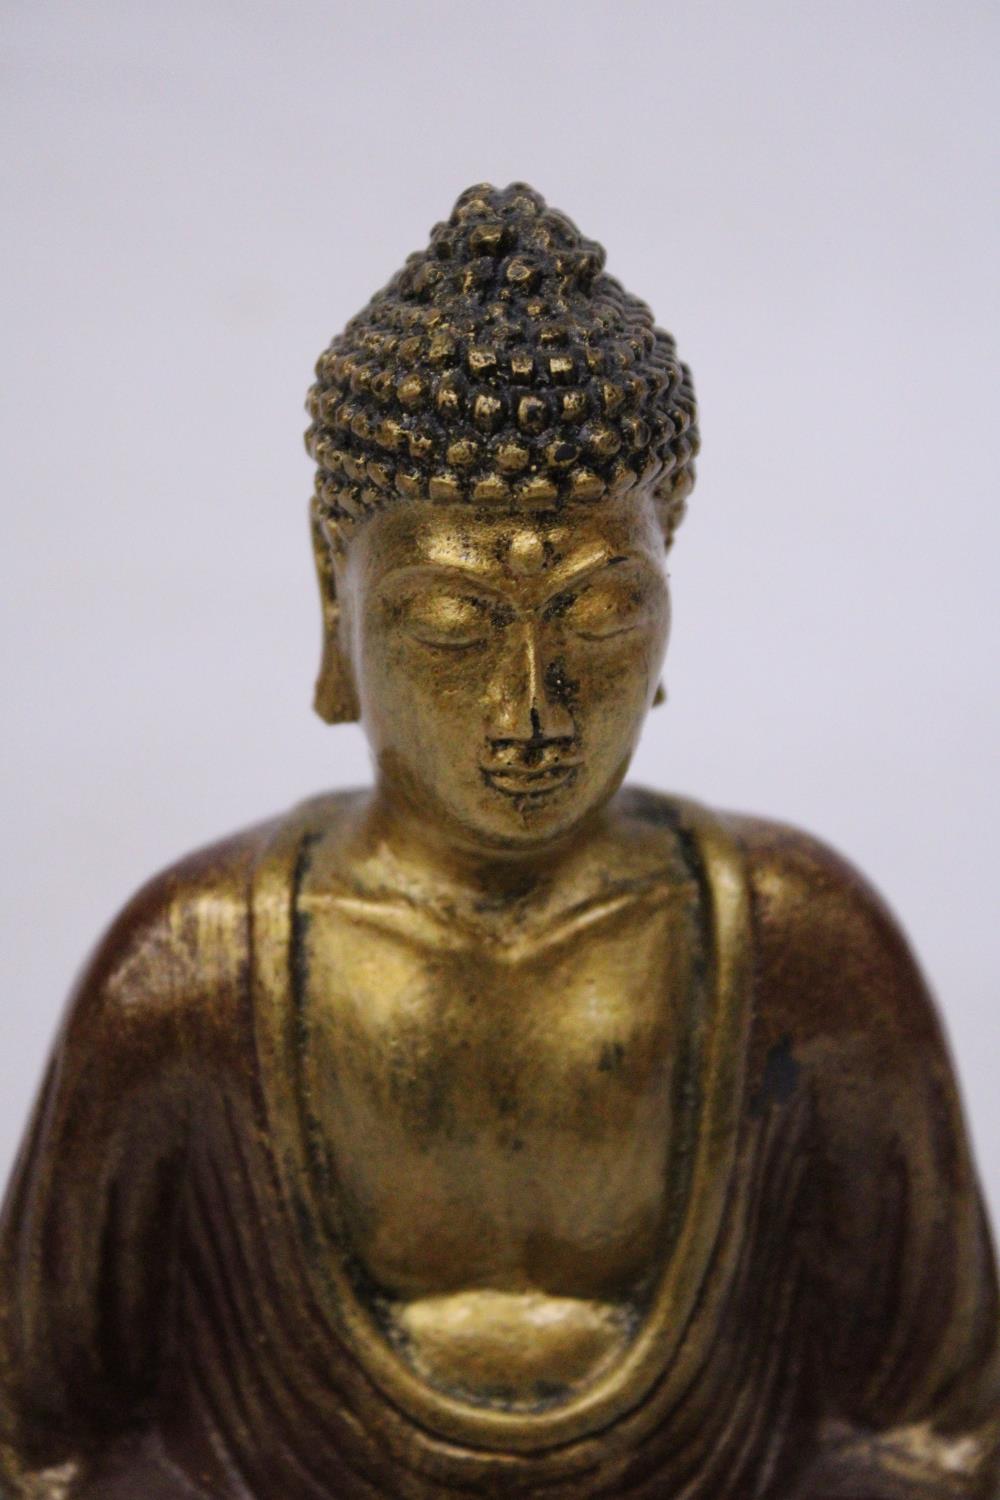 A SMALL RESIN GOLD COLOURED BUDDHA STATUE (16 CM) - Image 5 of 5